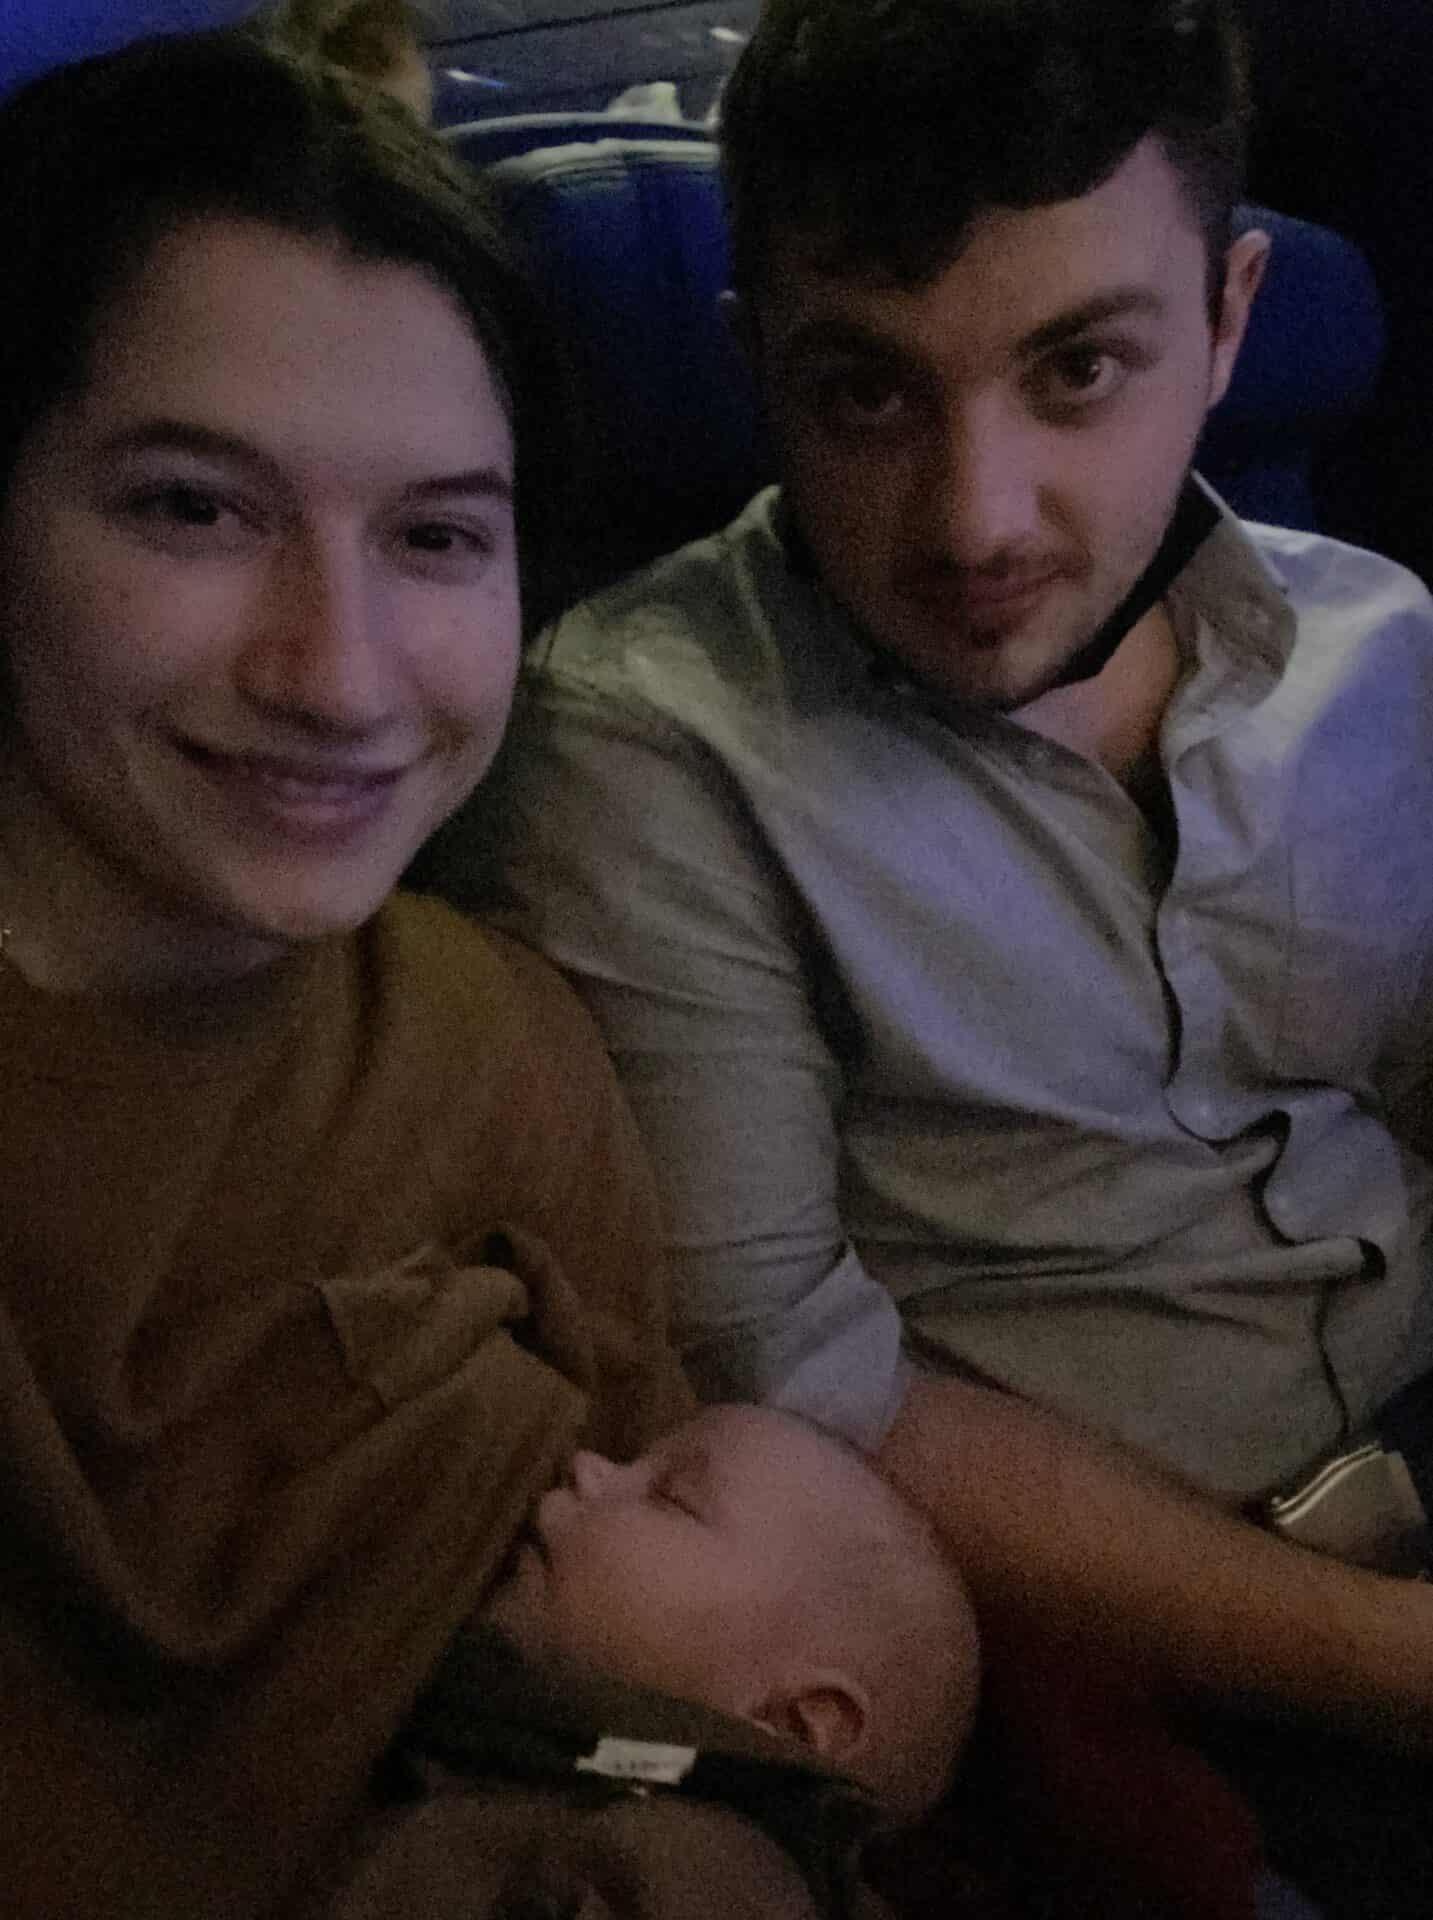 selfie of couple and sleeping baby in airplane